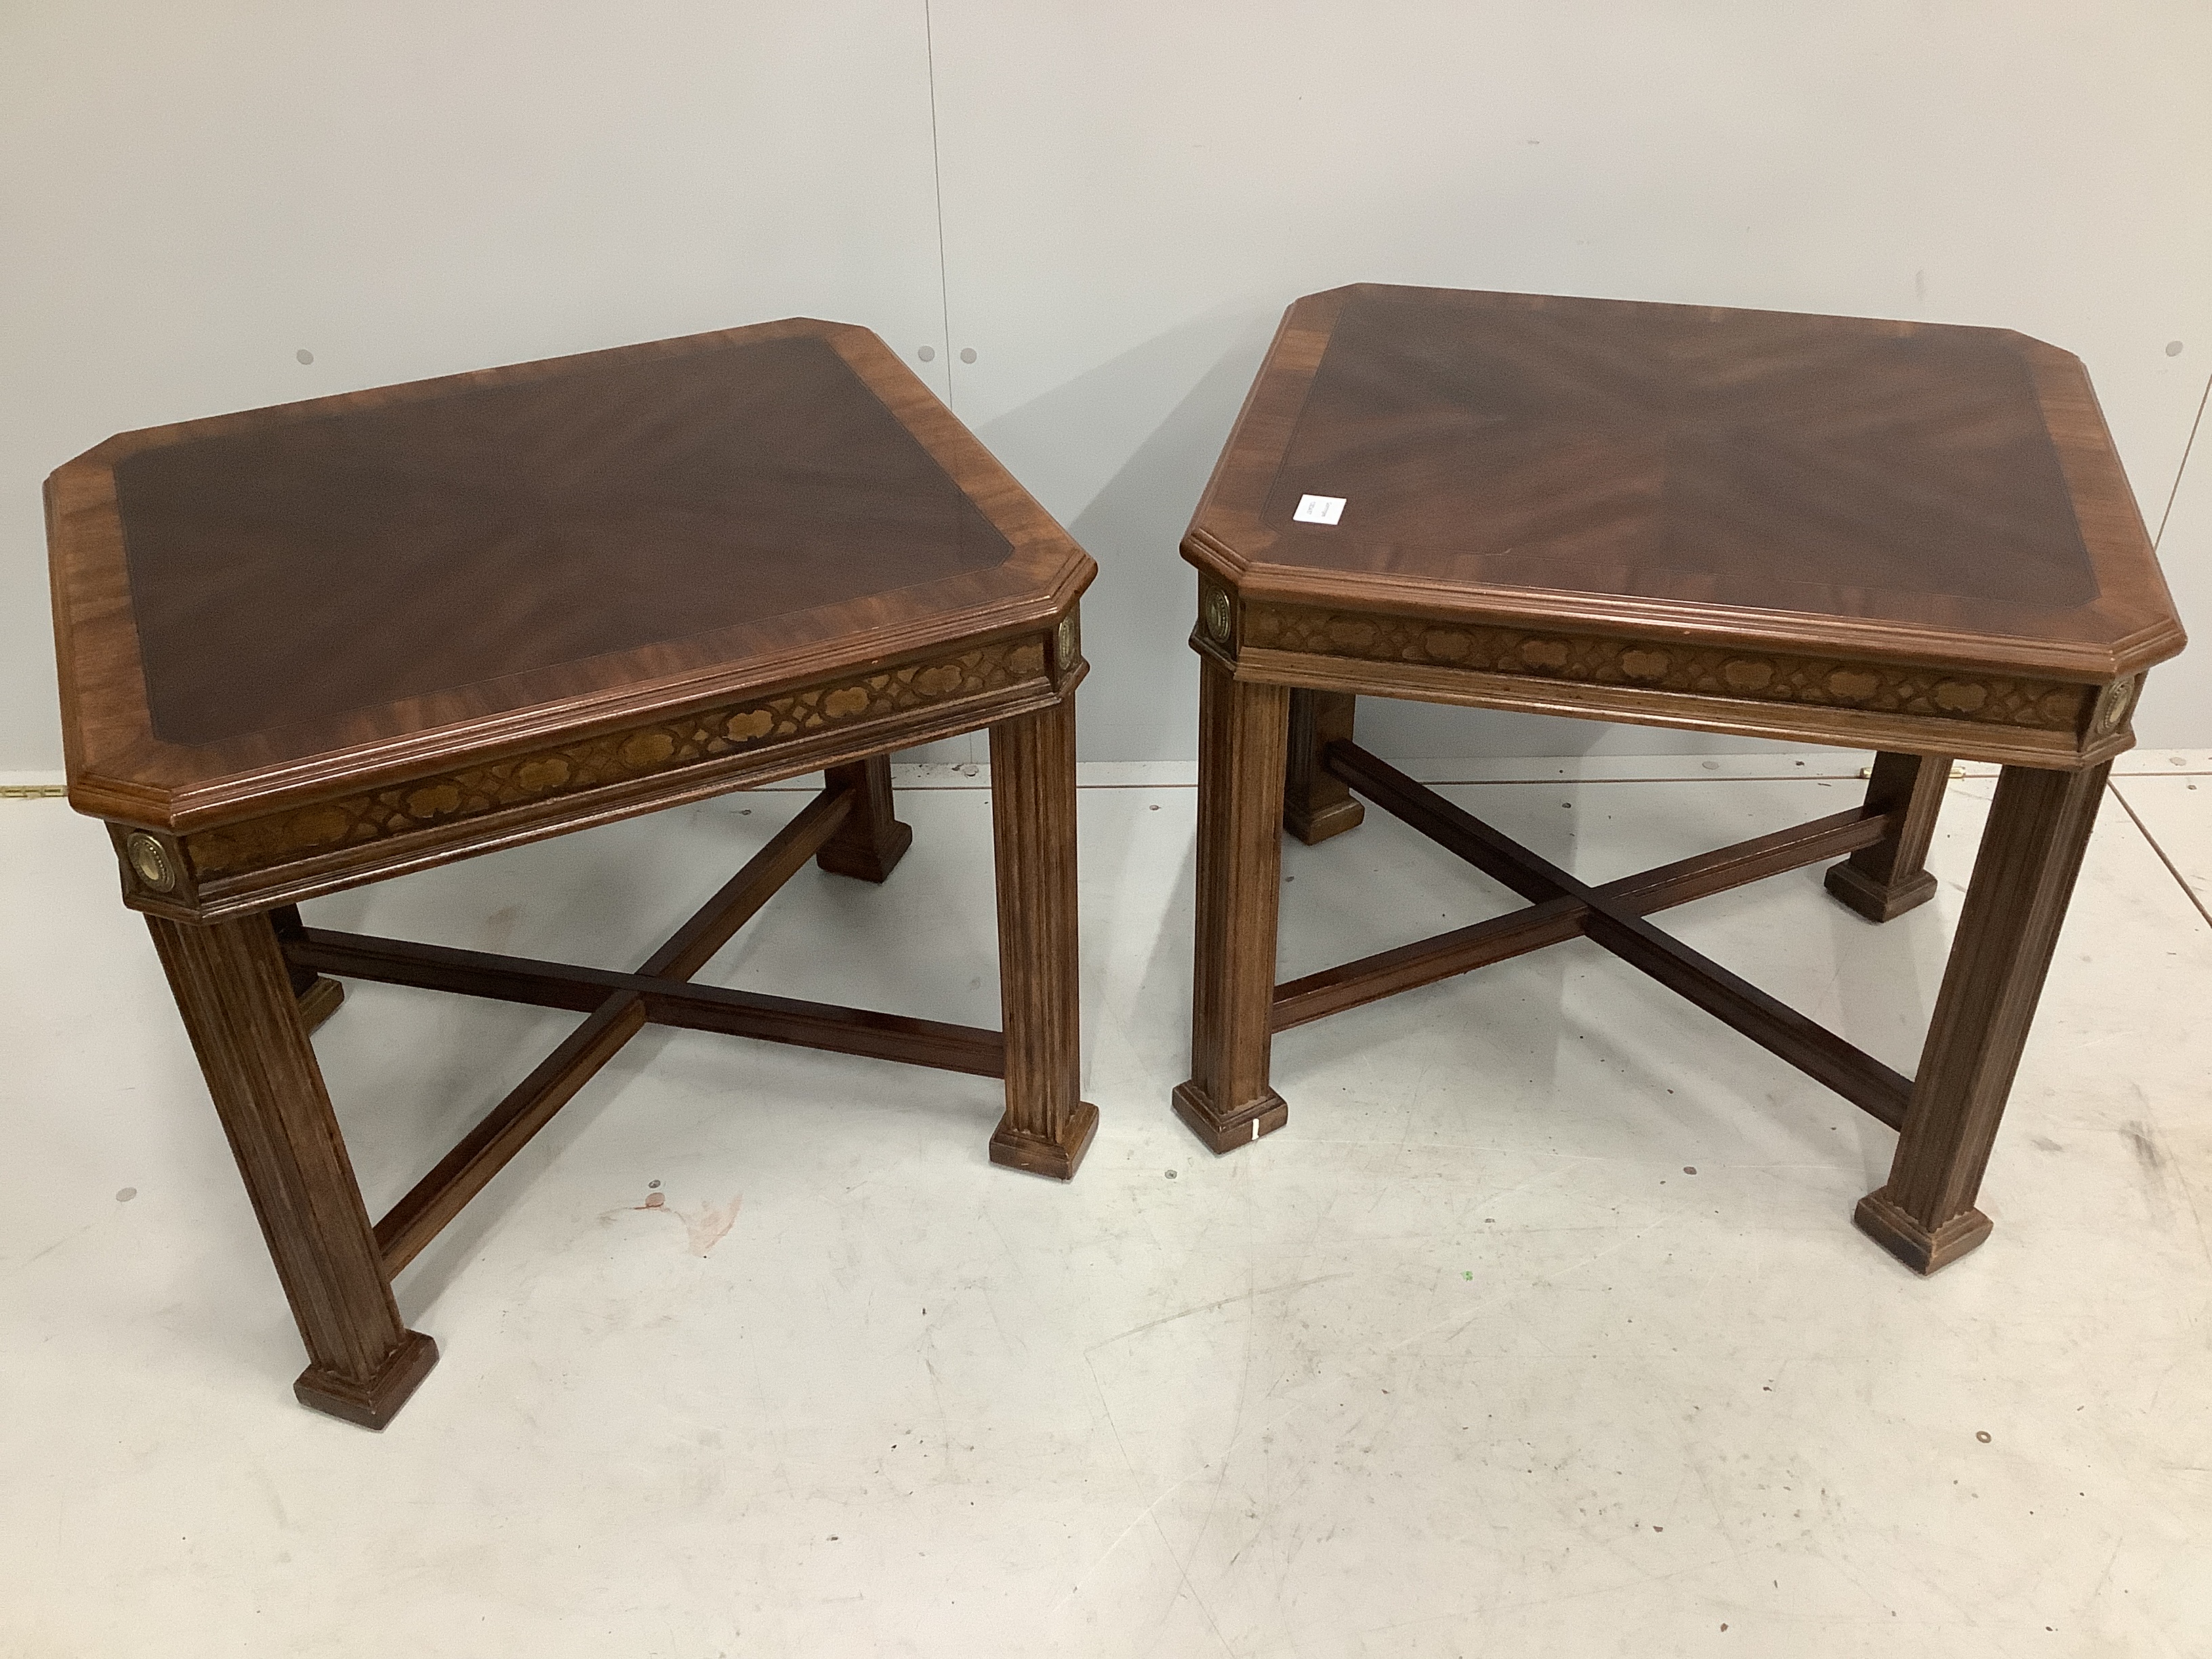 A pair of reproduction George III style mahogany occasional tables, width 56cm, depth 65cm, height